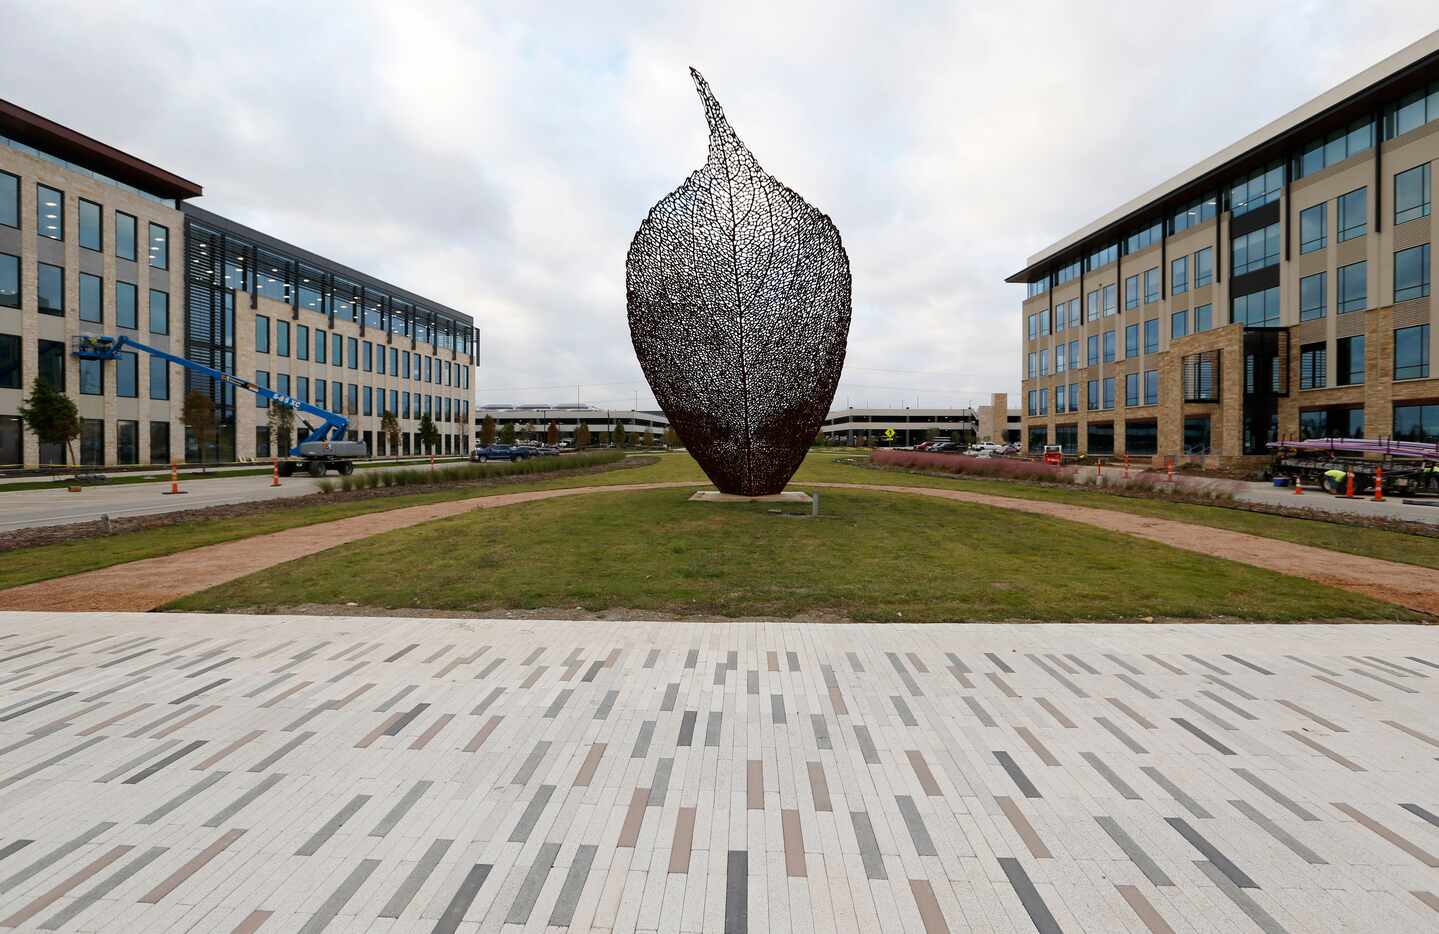 Leaf sculpture by Spanish artist Juanjo Novella at the Cypress Waters development.